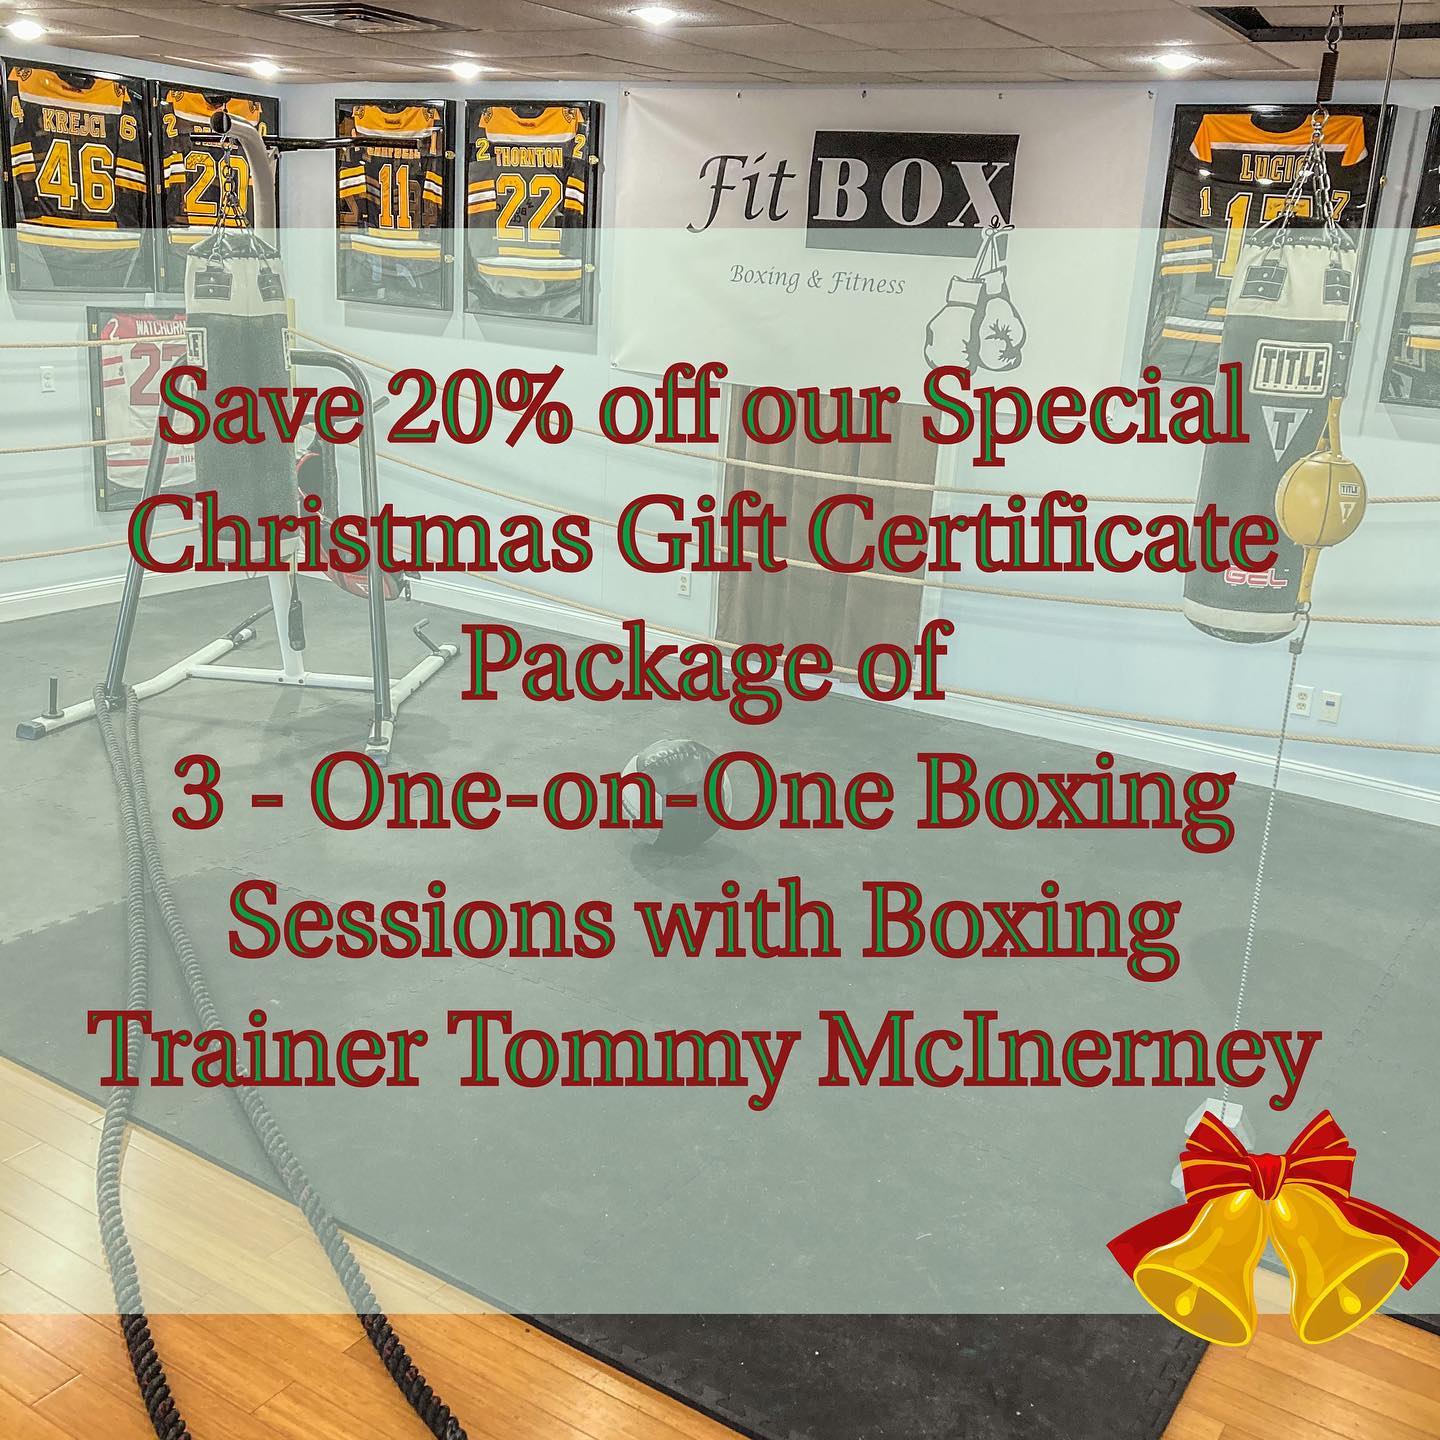 Holiday Christmas gift Certificates Available Now. Contact us at Call/Text (781)727-9503 or email fitbox@outlook.com . @tommymcinerney www.Fitboxdedham.com .